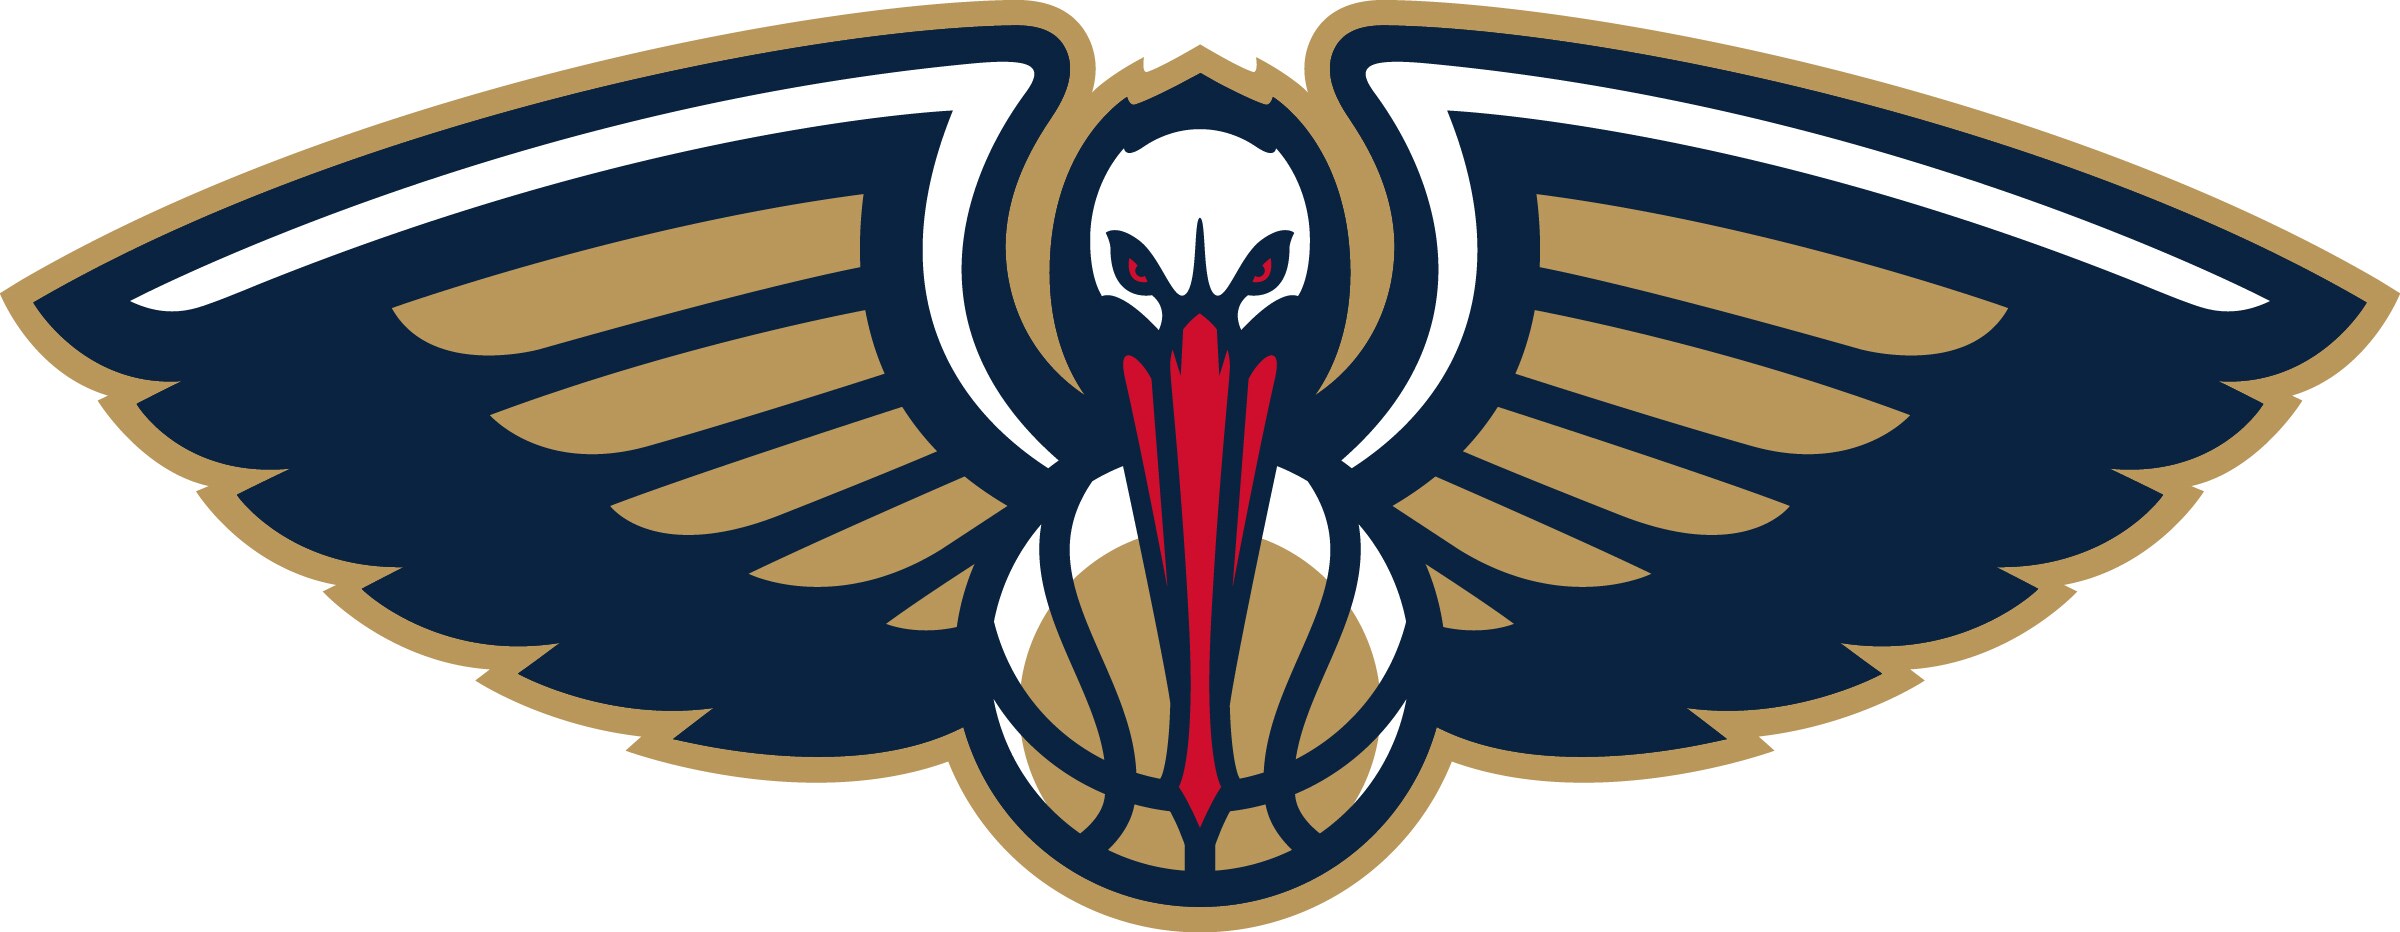 Pelicans seek exclamation point victory over Kristaps Porzingis and Knicks - The Bird ...